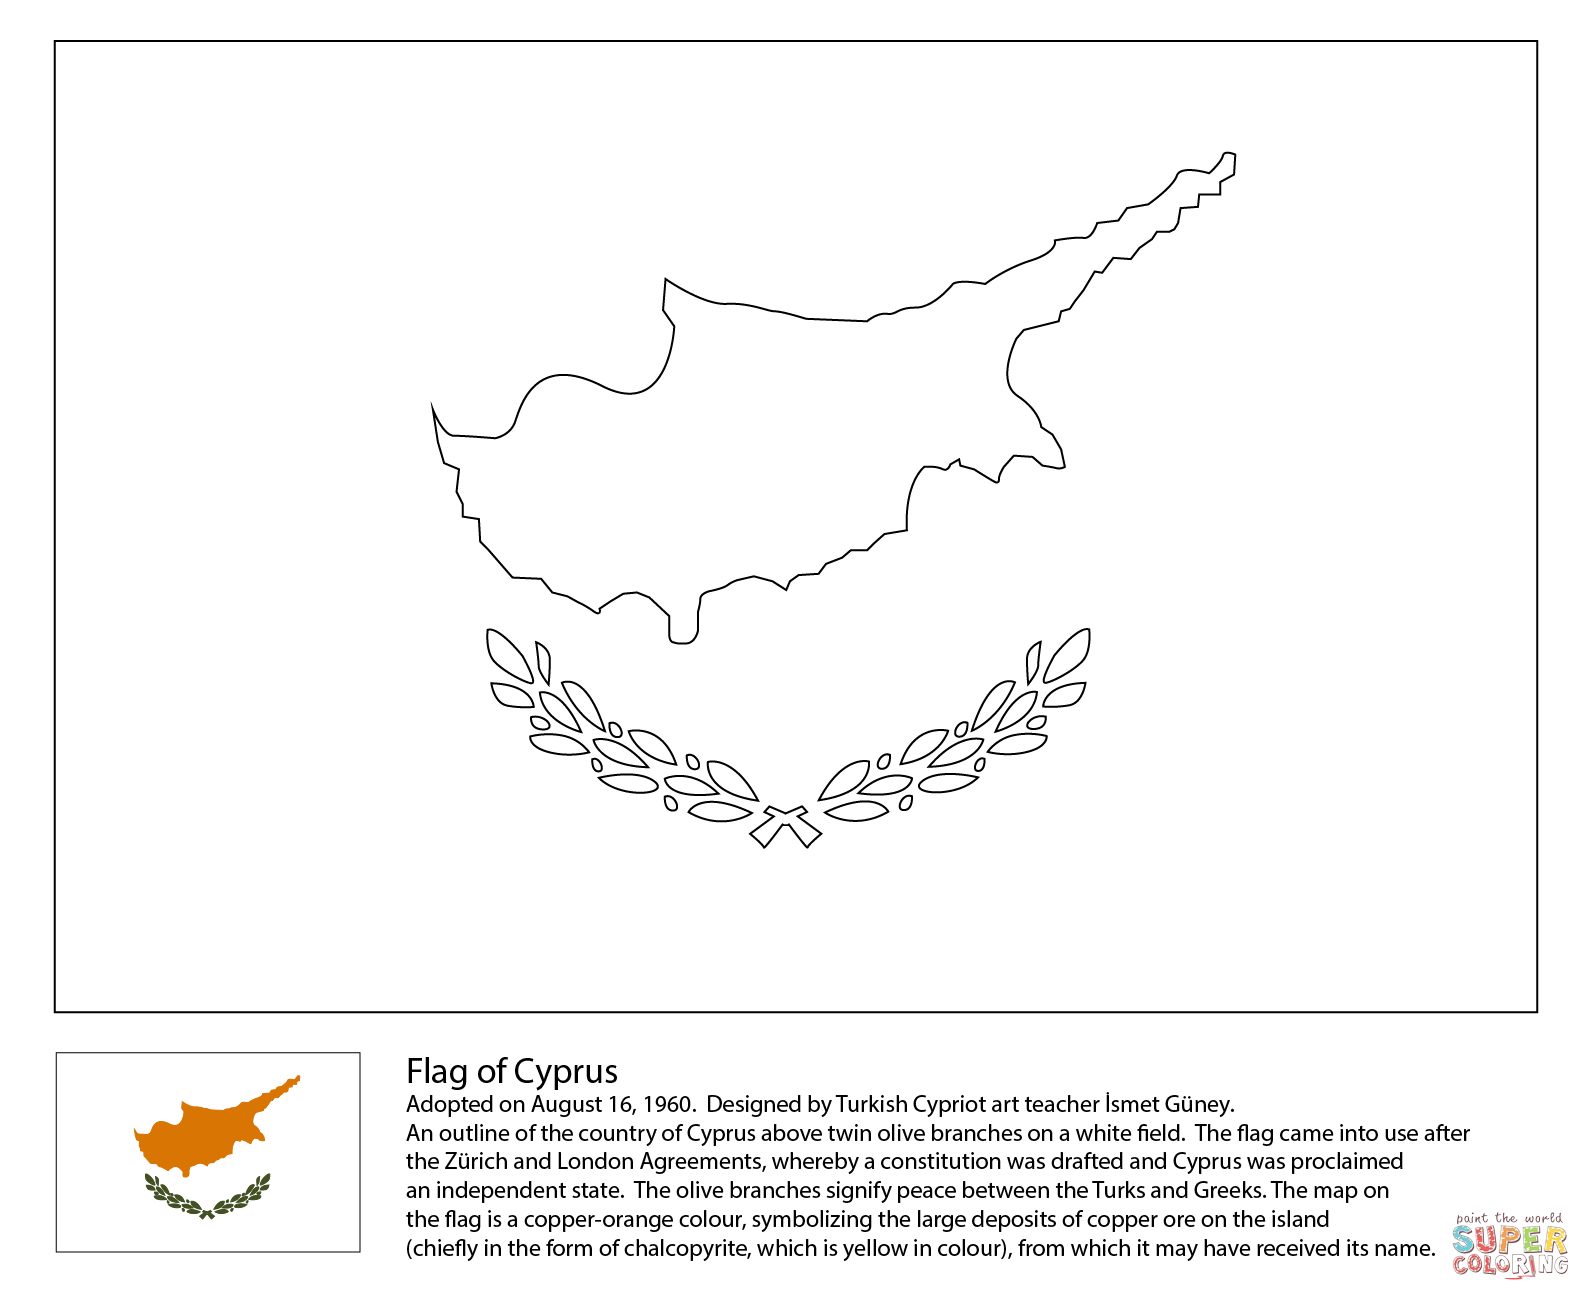 New Zealand Flag Coloring Page Flag Of New Zealand Coloring Page Free Printable Coloring Pages